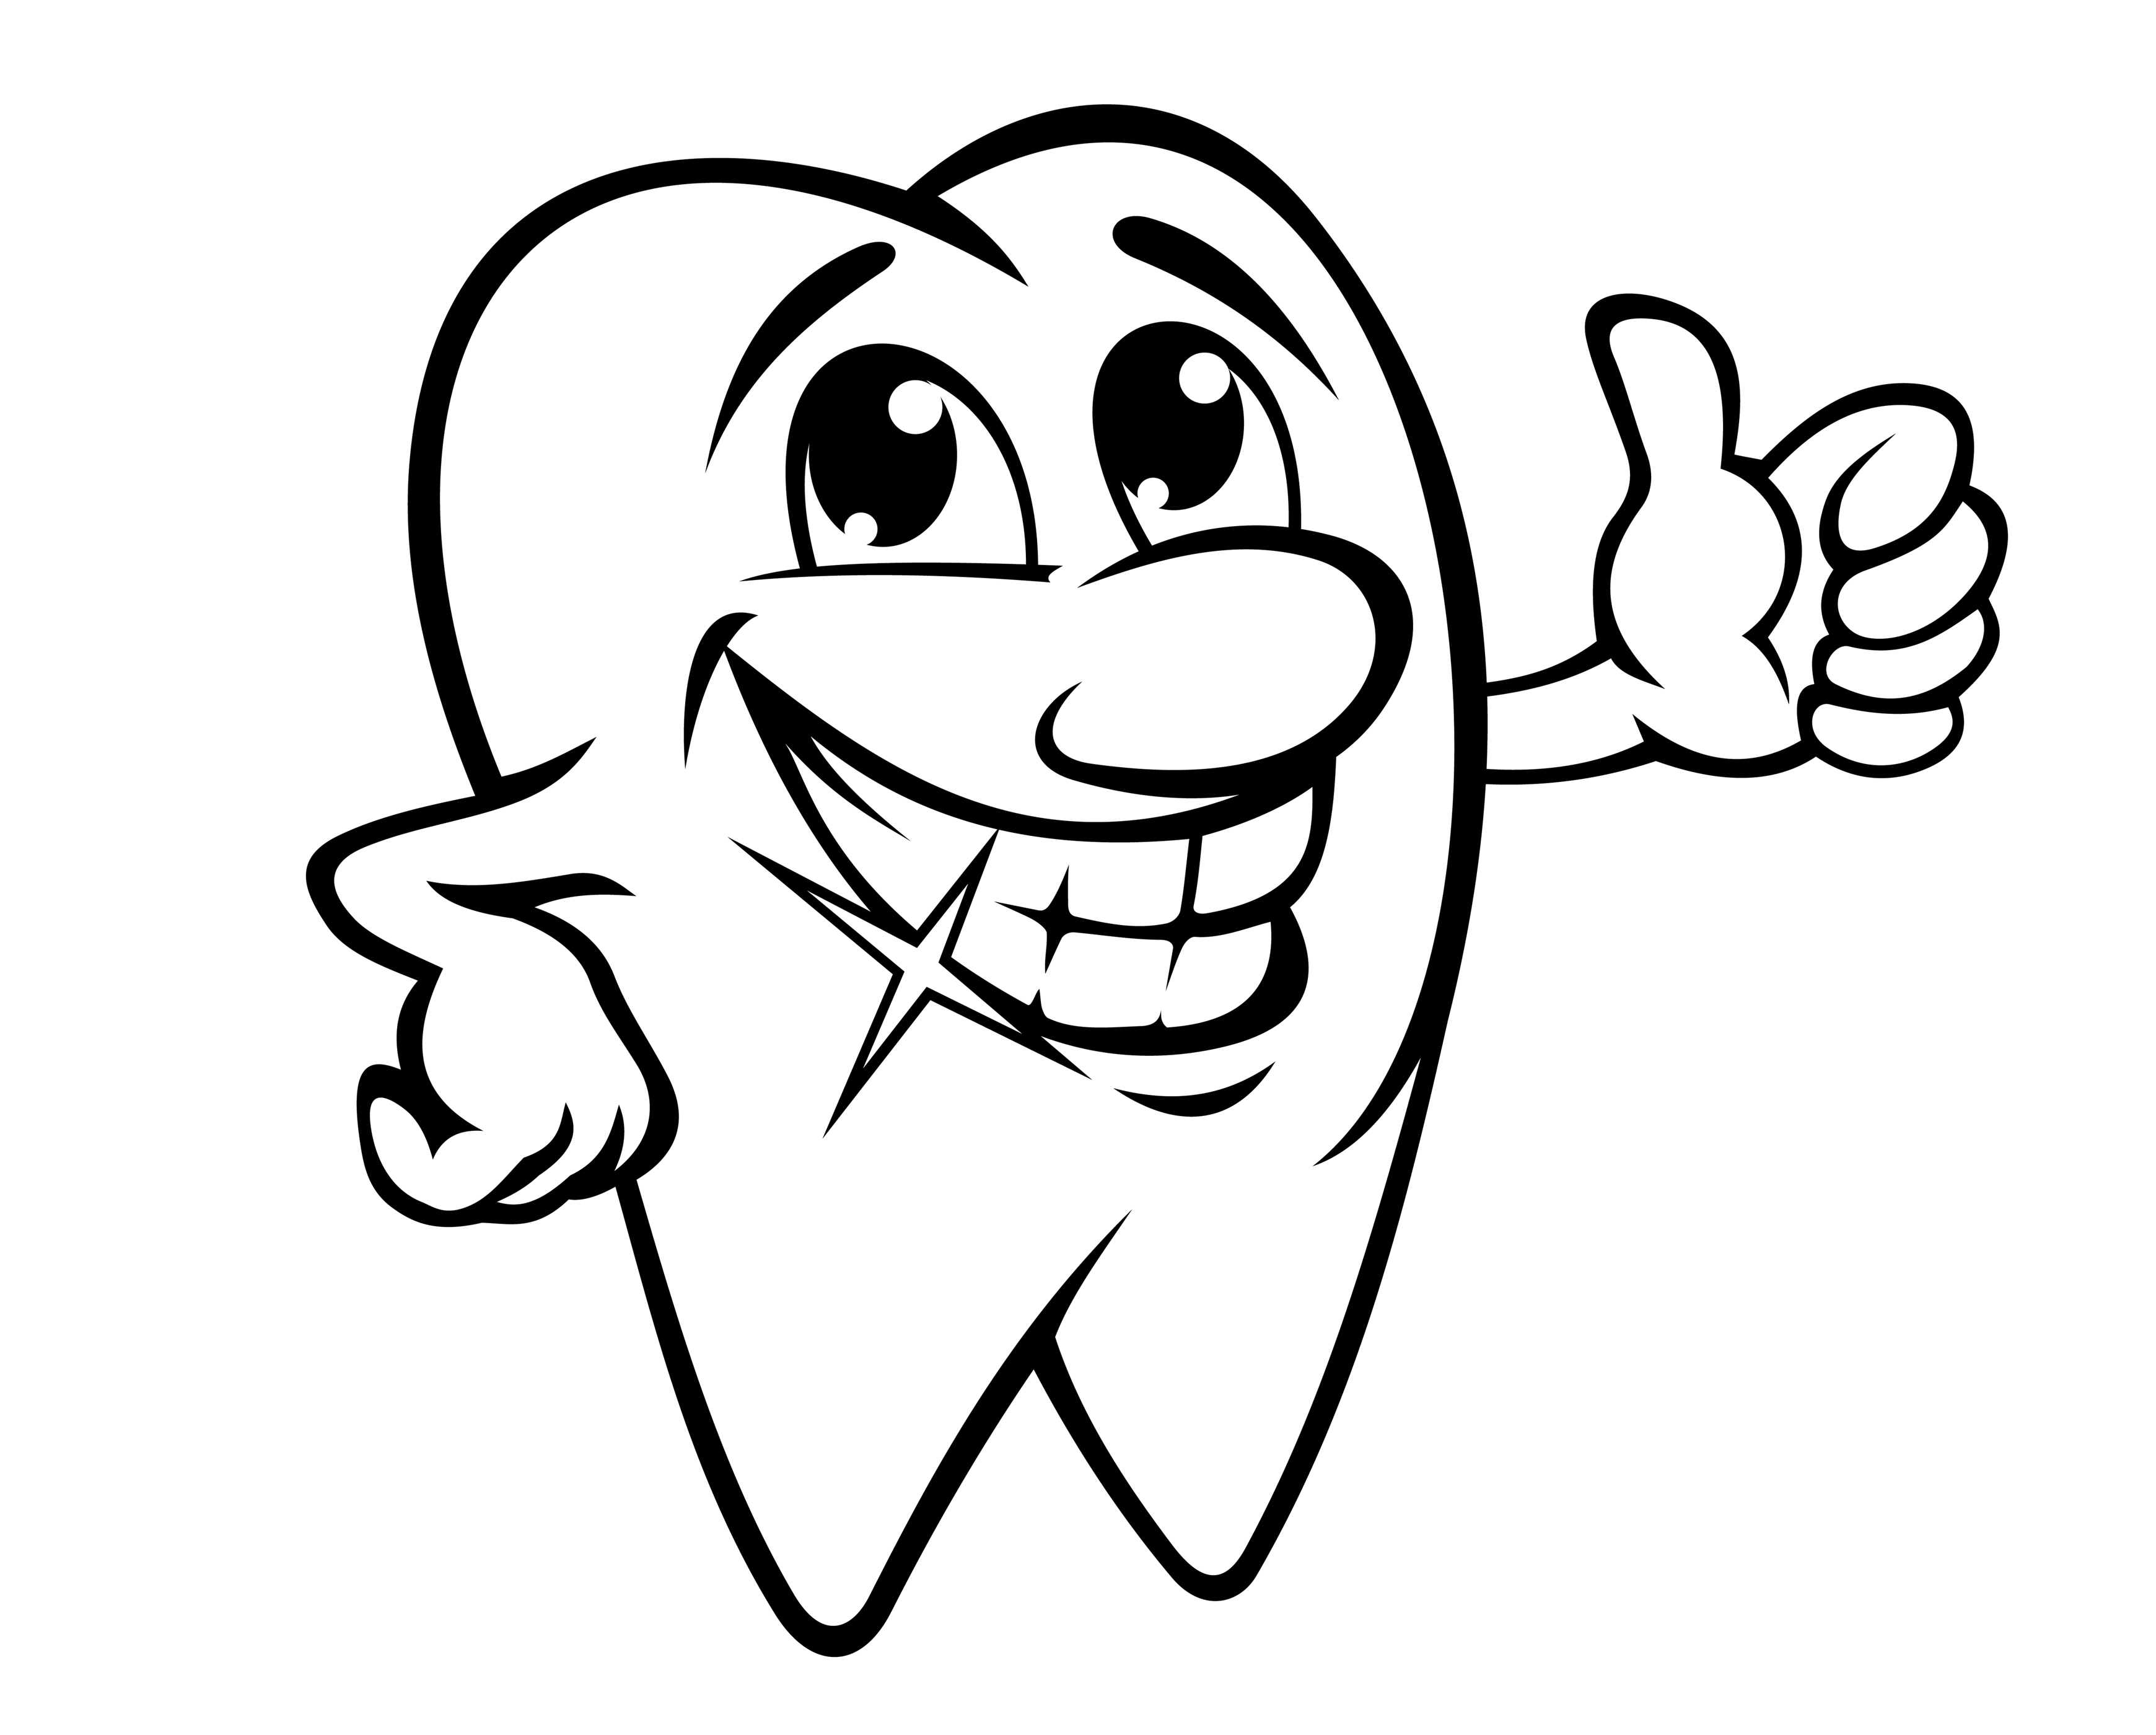 Images Of Tooth Clipart Best